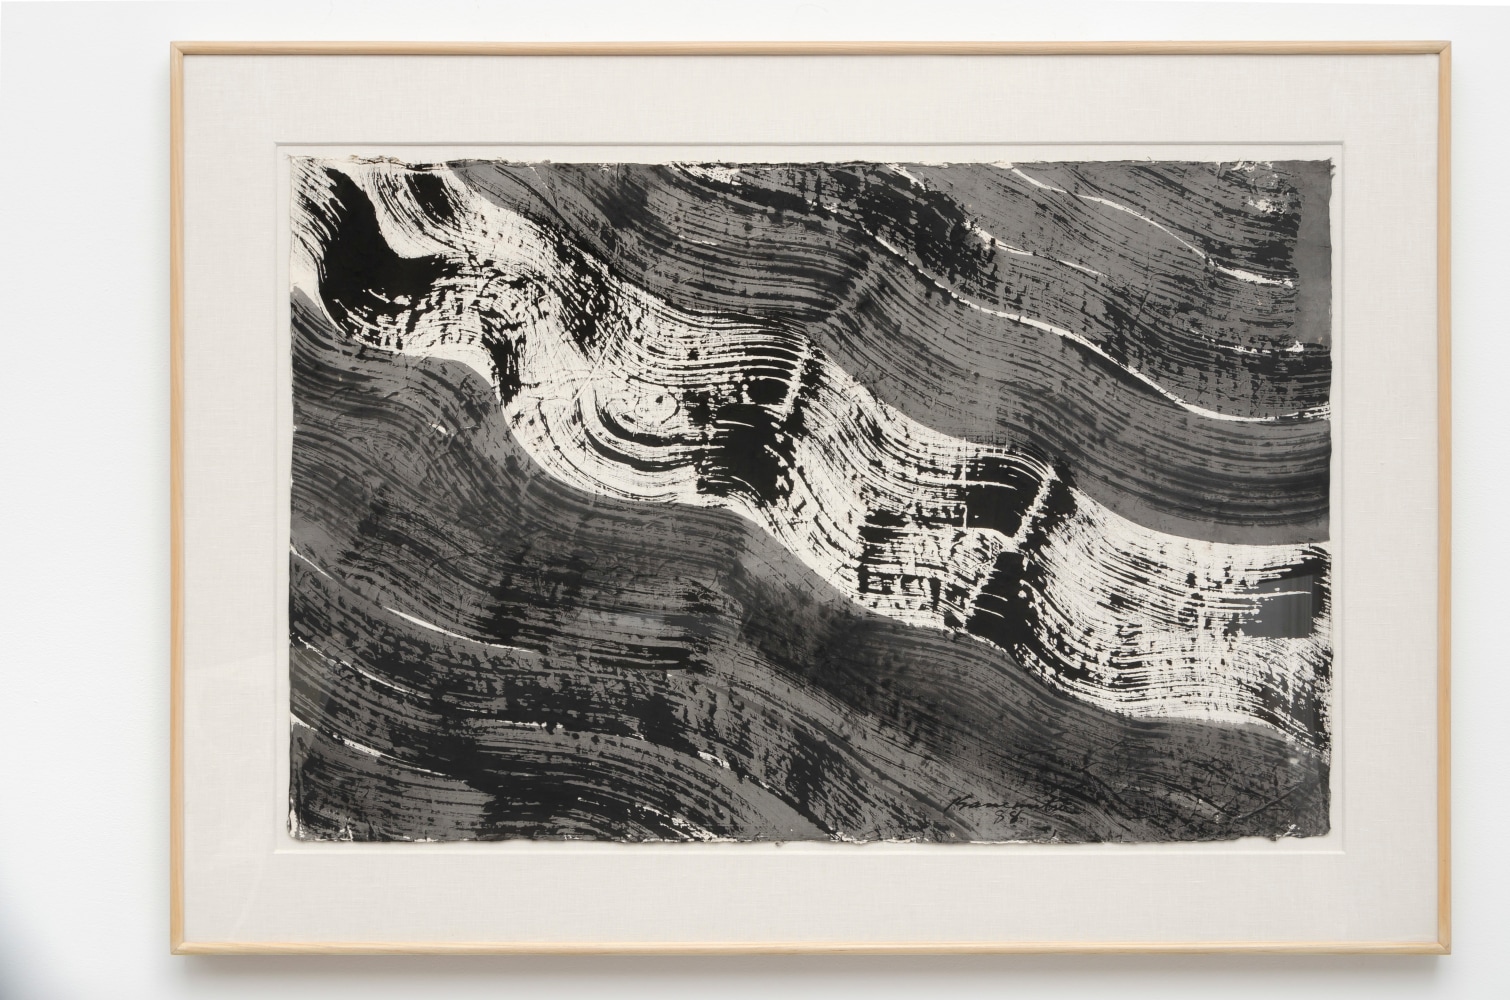 Nagare #5, 1988, sumi ink on handmade Japanese paper 33 1/2 x 46 1/2 inches;  85.1 x 118.1 centimeters LSFA# 13956